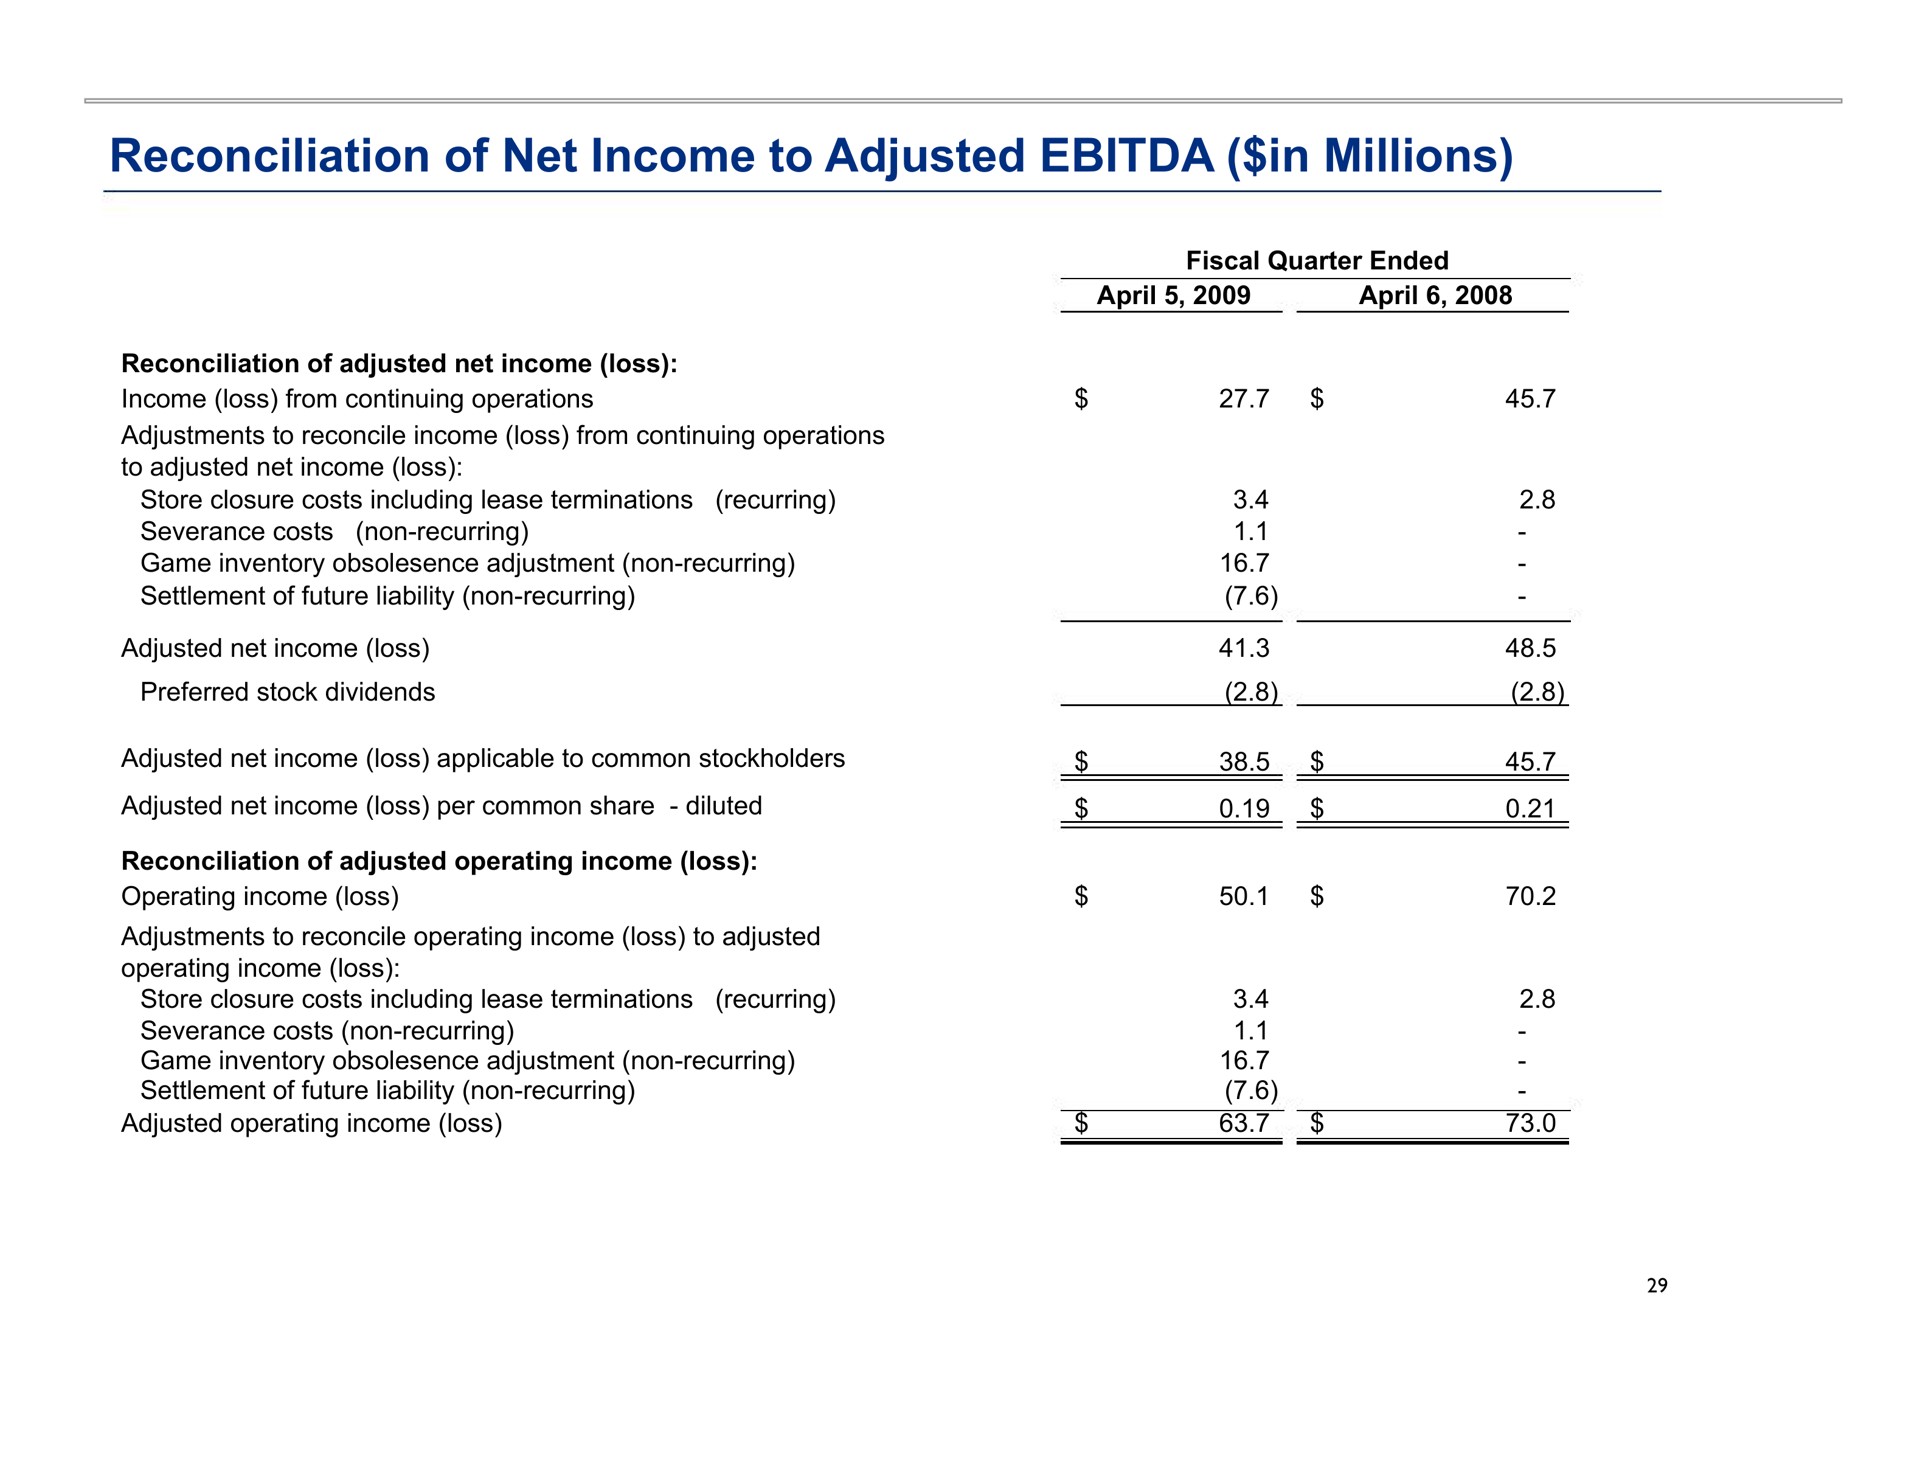 reconciliation of net income to adjusted in millions | Blockbuster Video